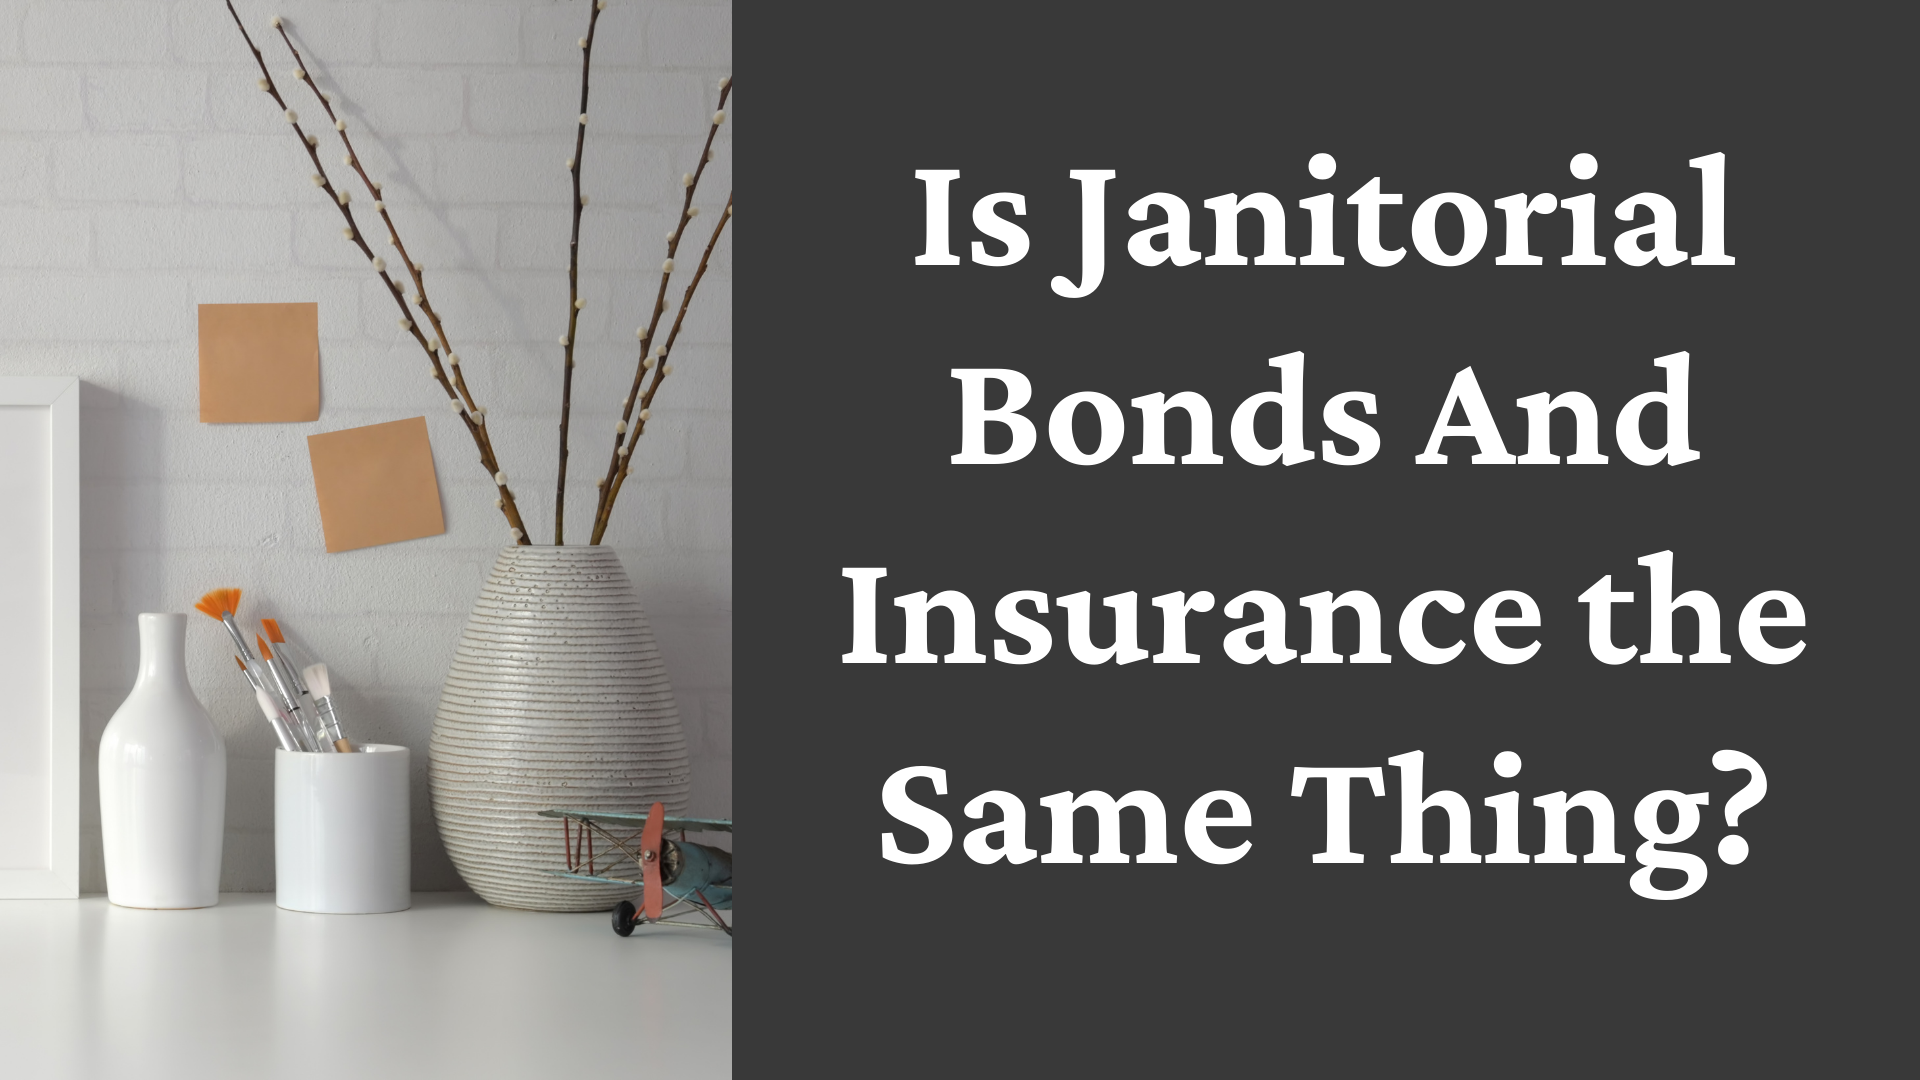 surety bond - What exactly does it mean to be bonded and insured